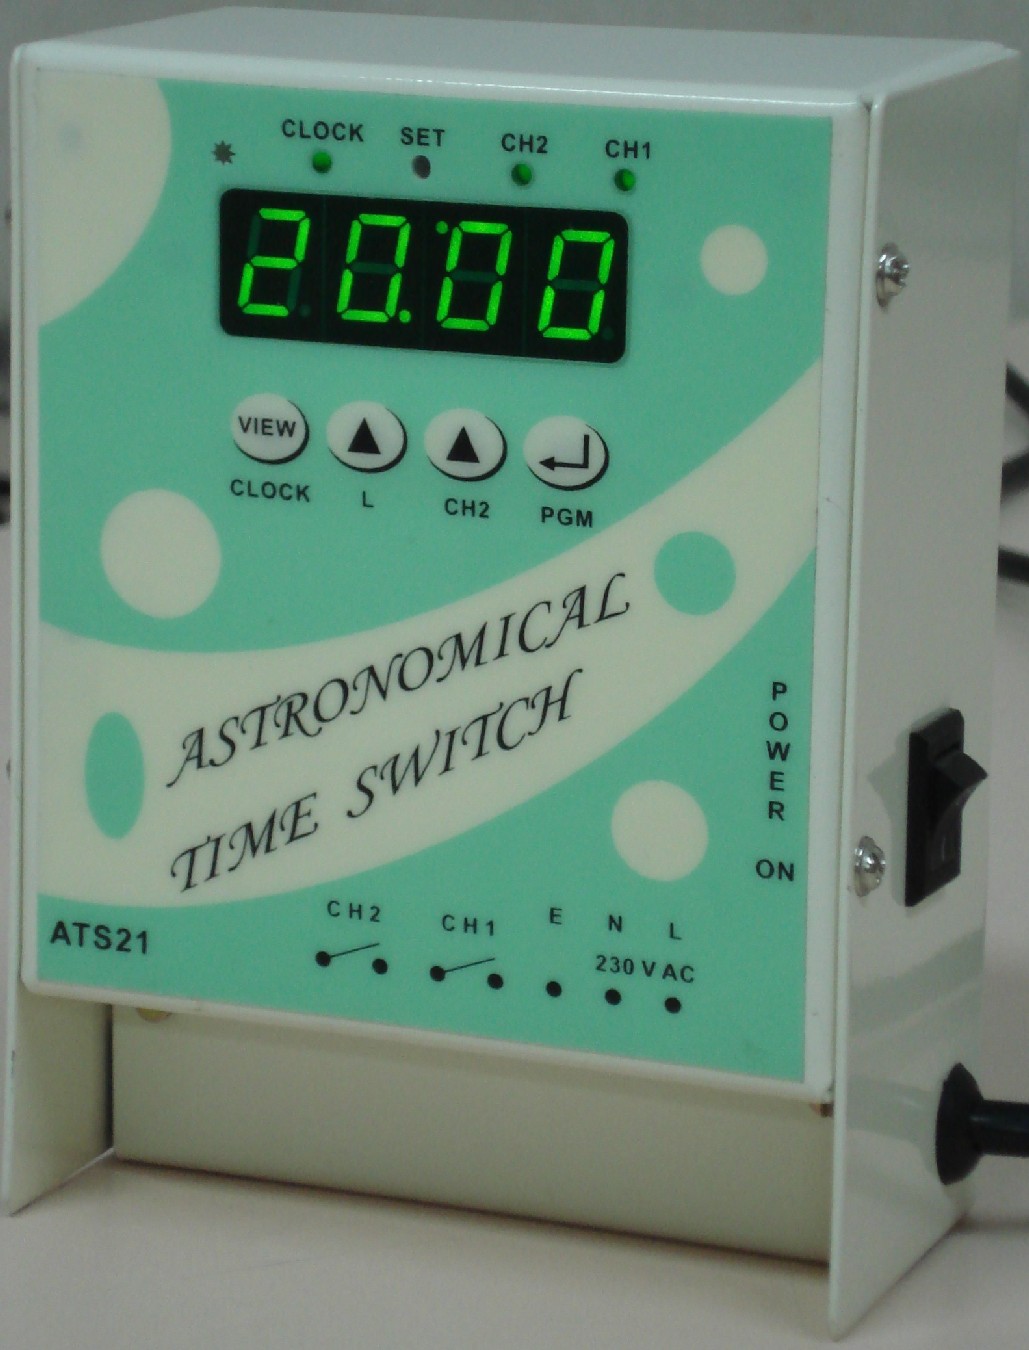 ASTRONOMICAL TIME SWITCH